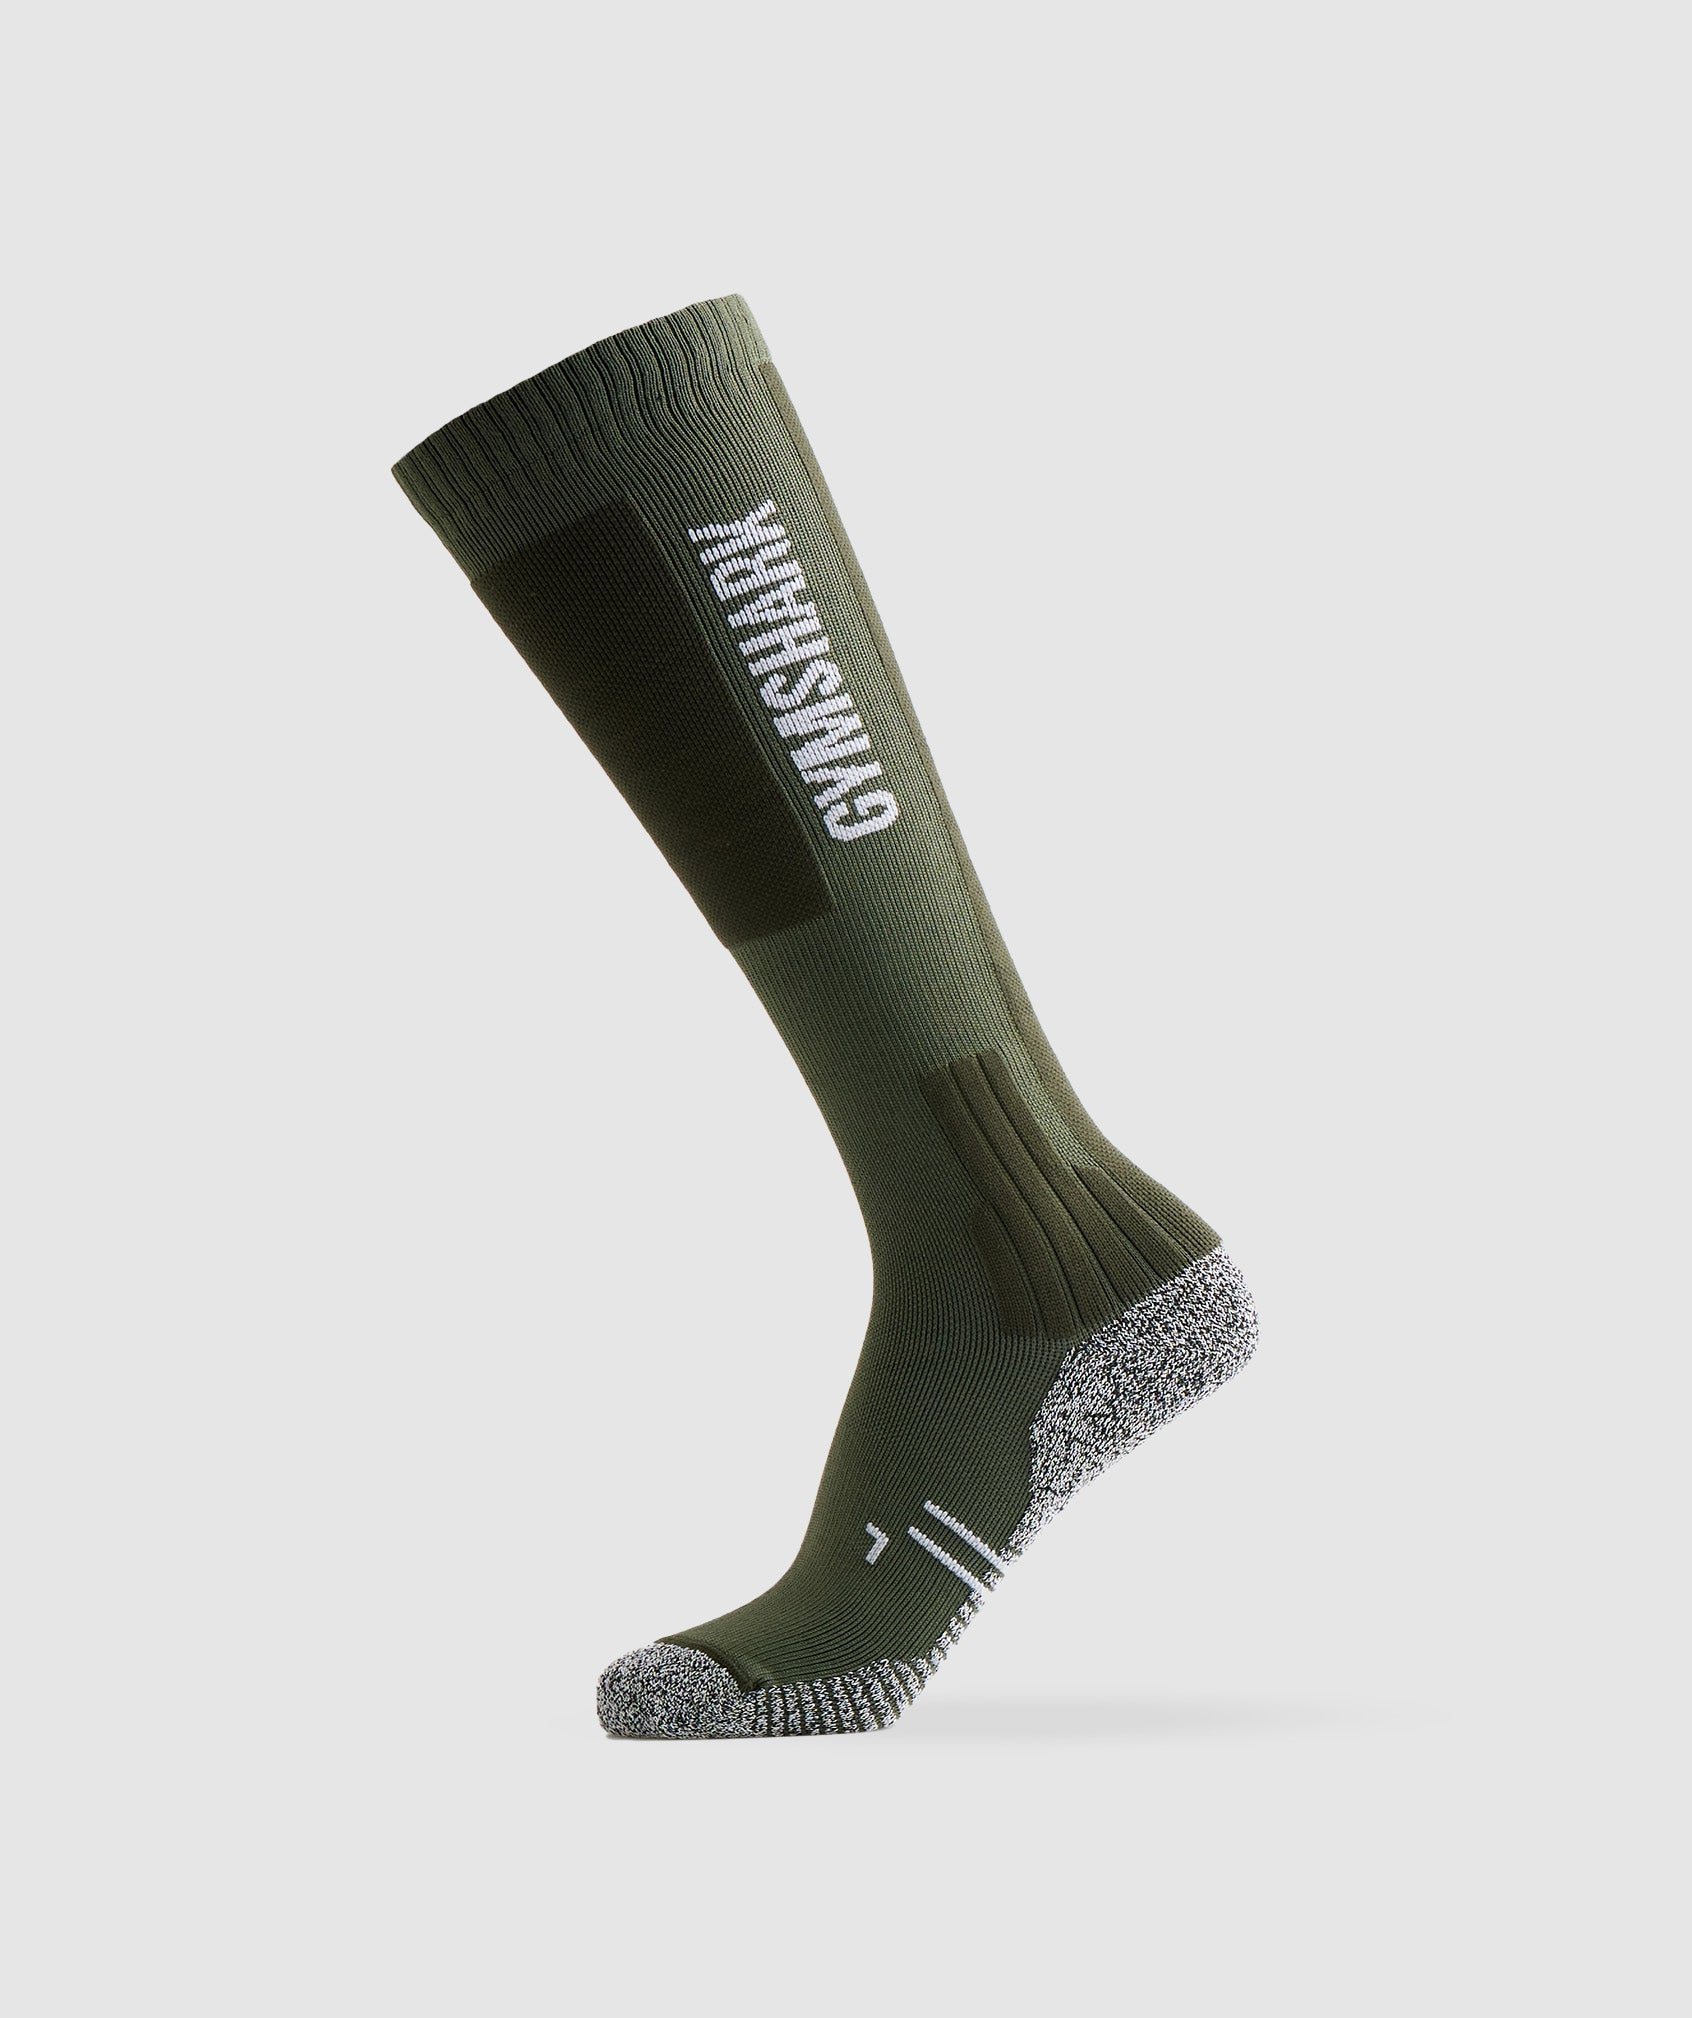 Weightlifting Sock in Olive Green - view 1